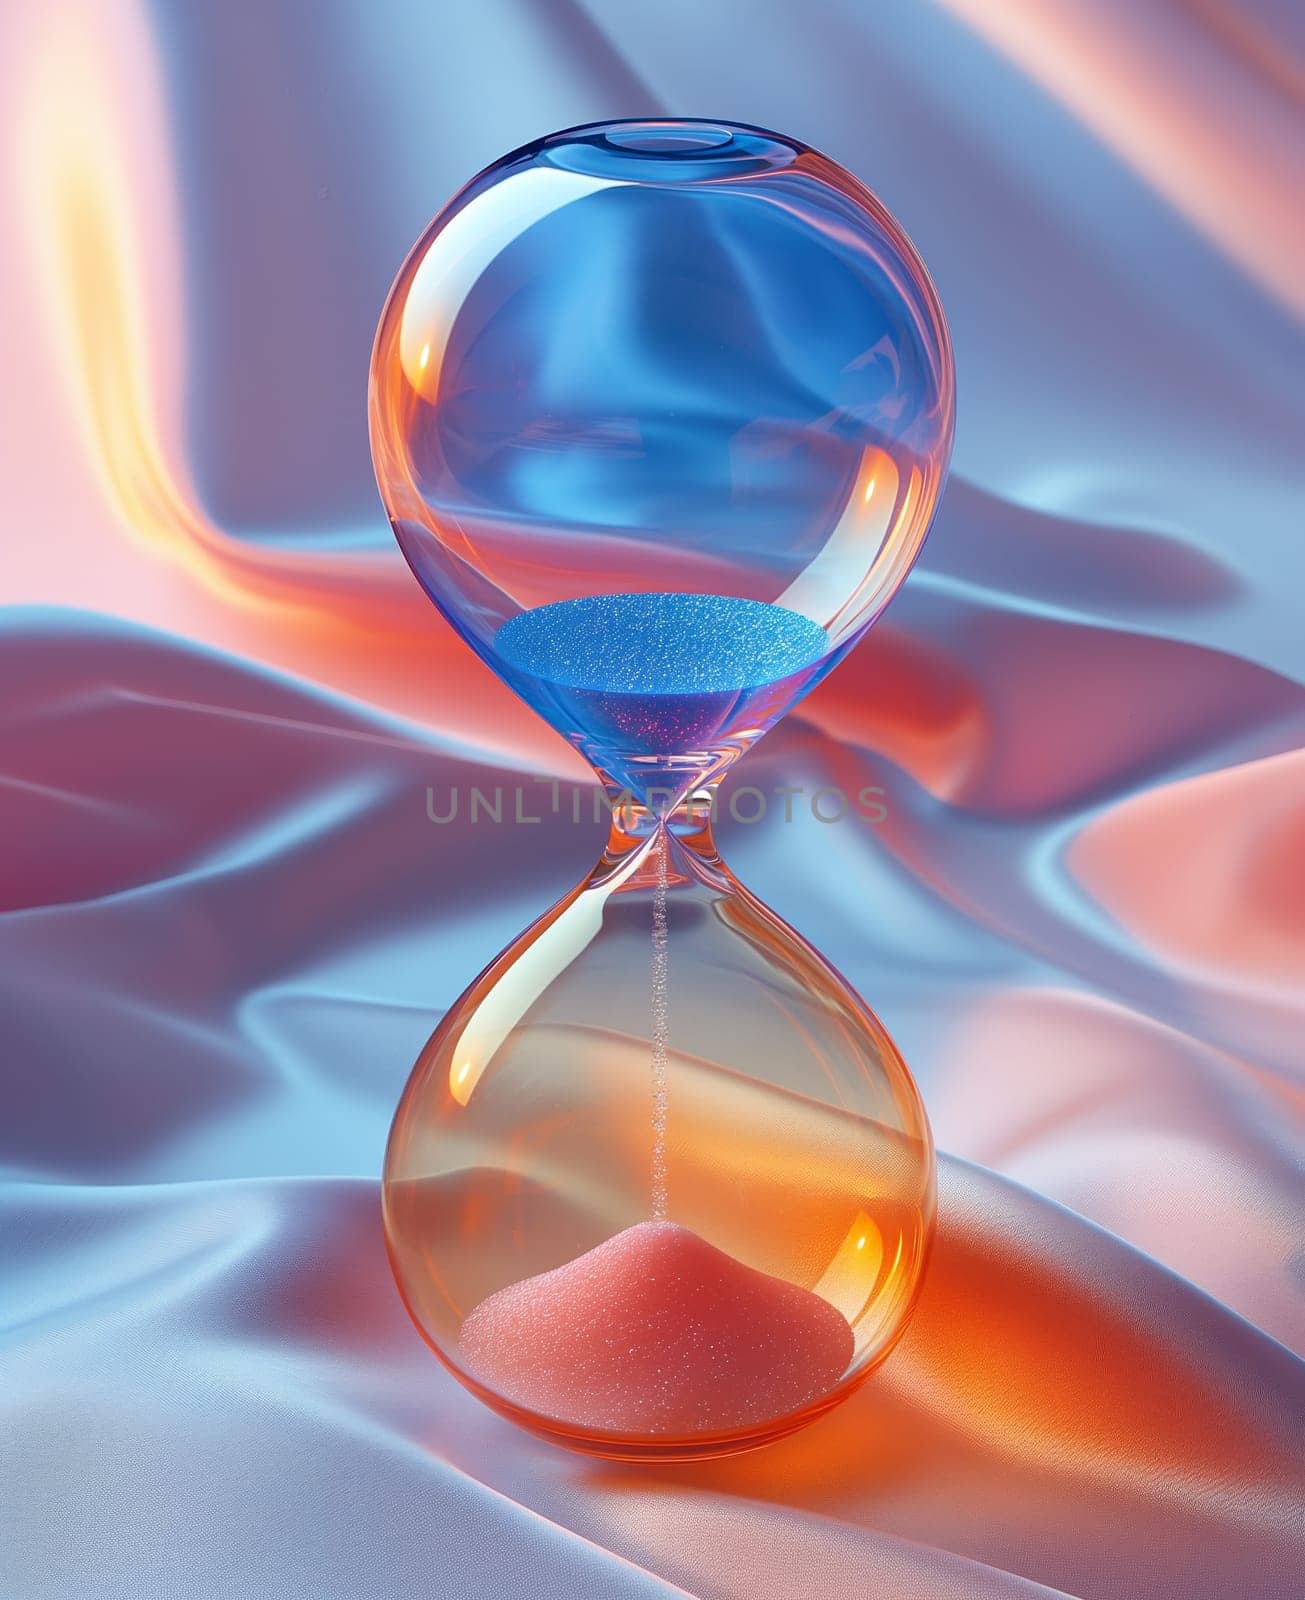 Hourglass showing time on colorful abstract background. by Fischeron